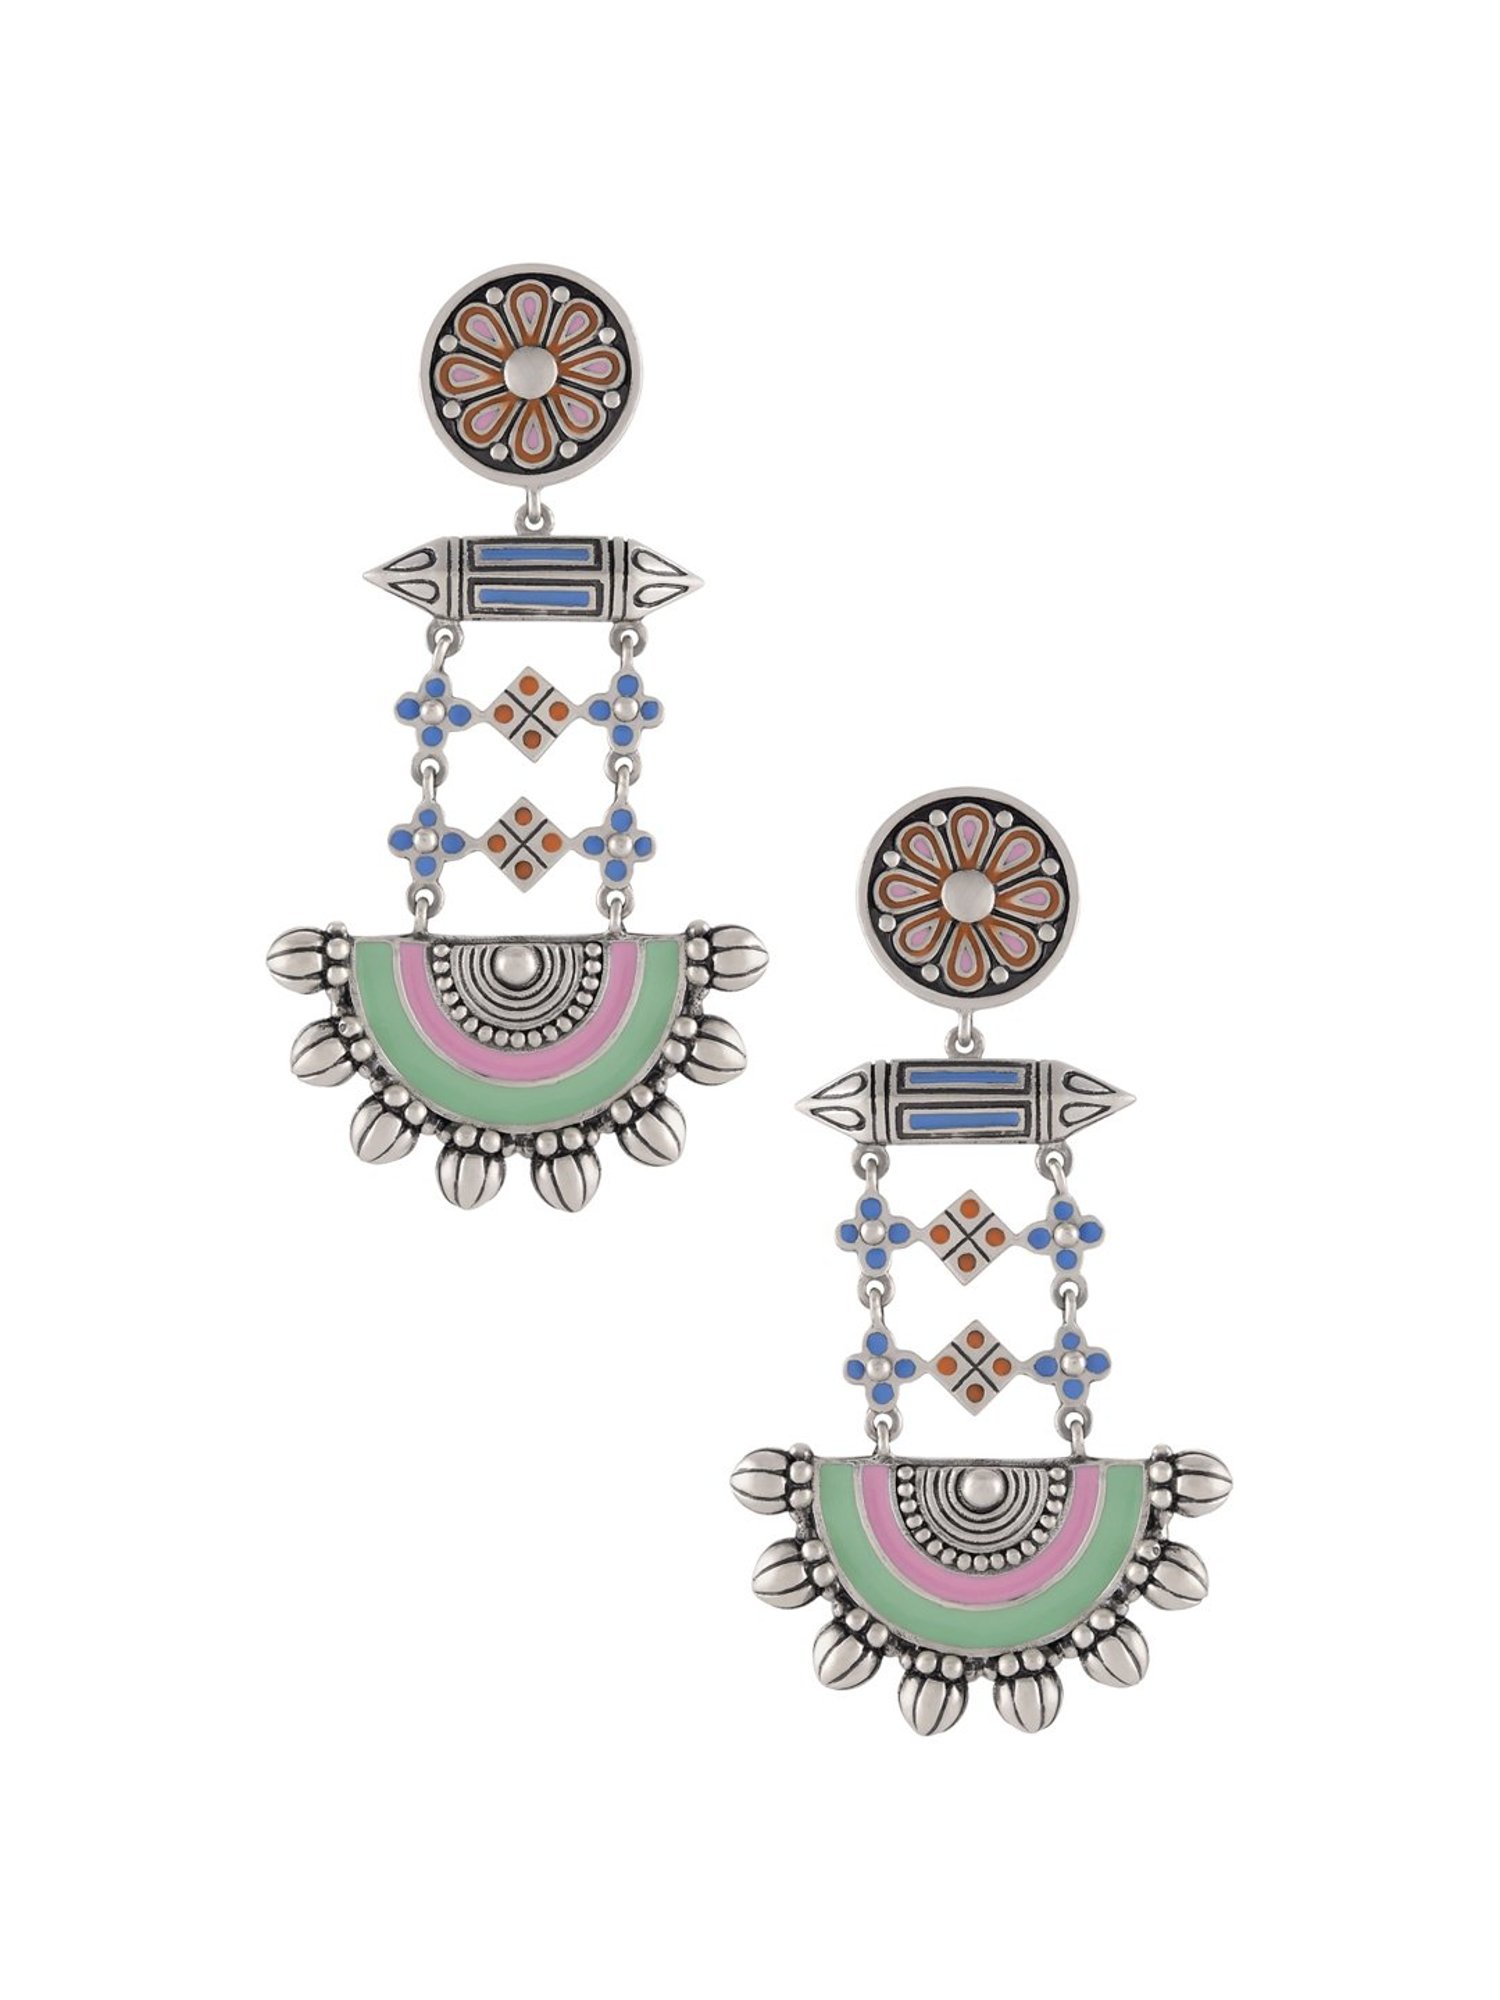 Buy Tribe Amrapali Silver Alloy Ear Jacket Earrings Online At Best Price   Tata CLiQ